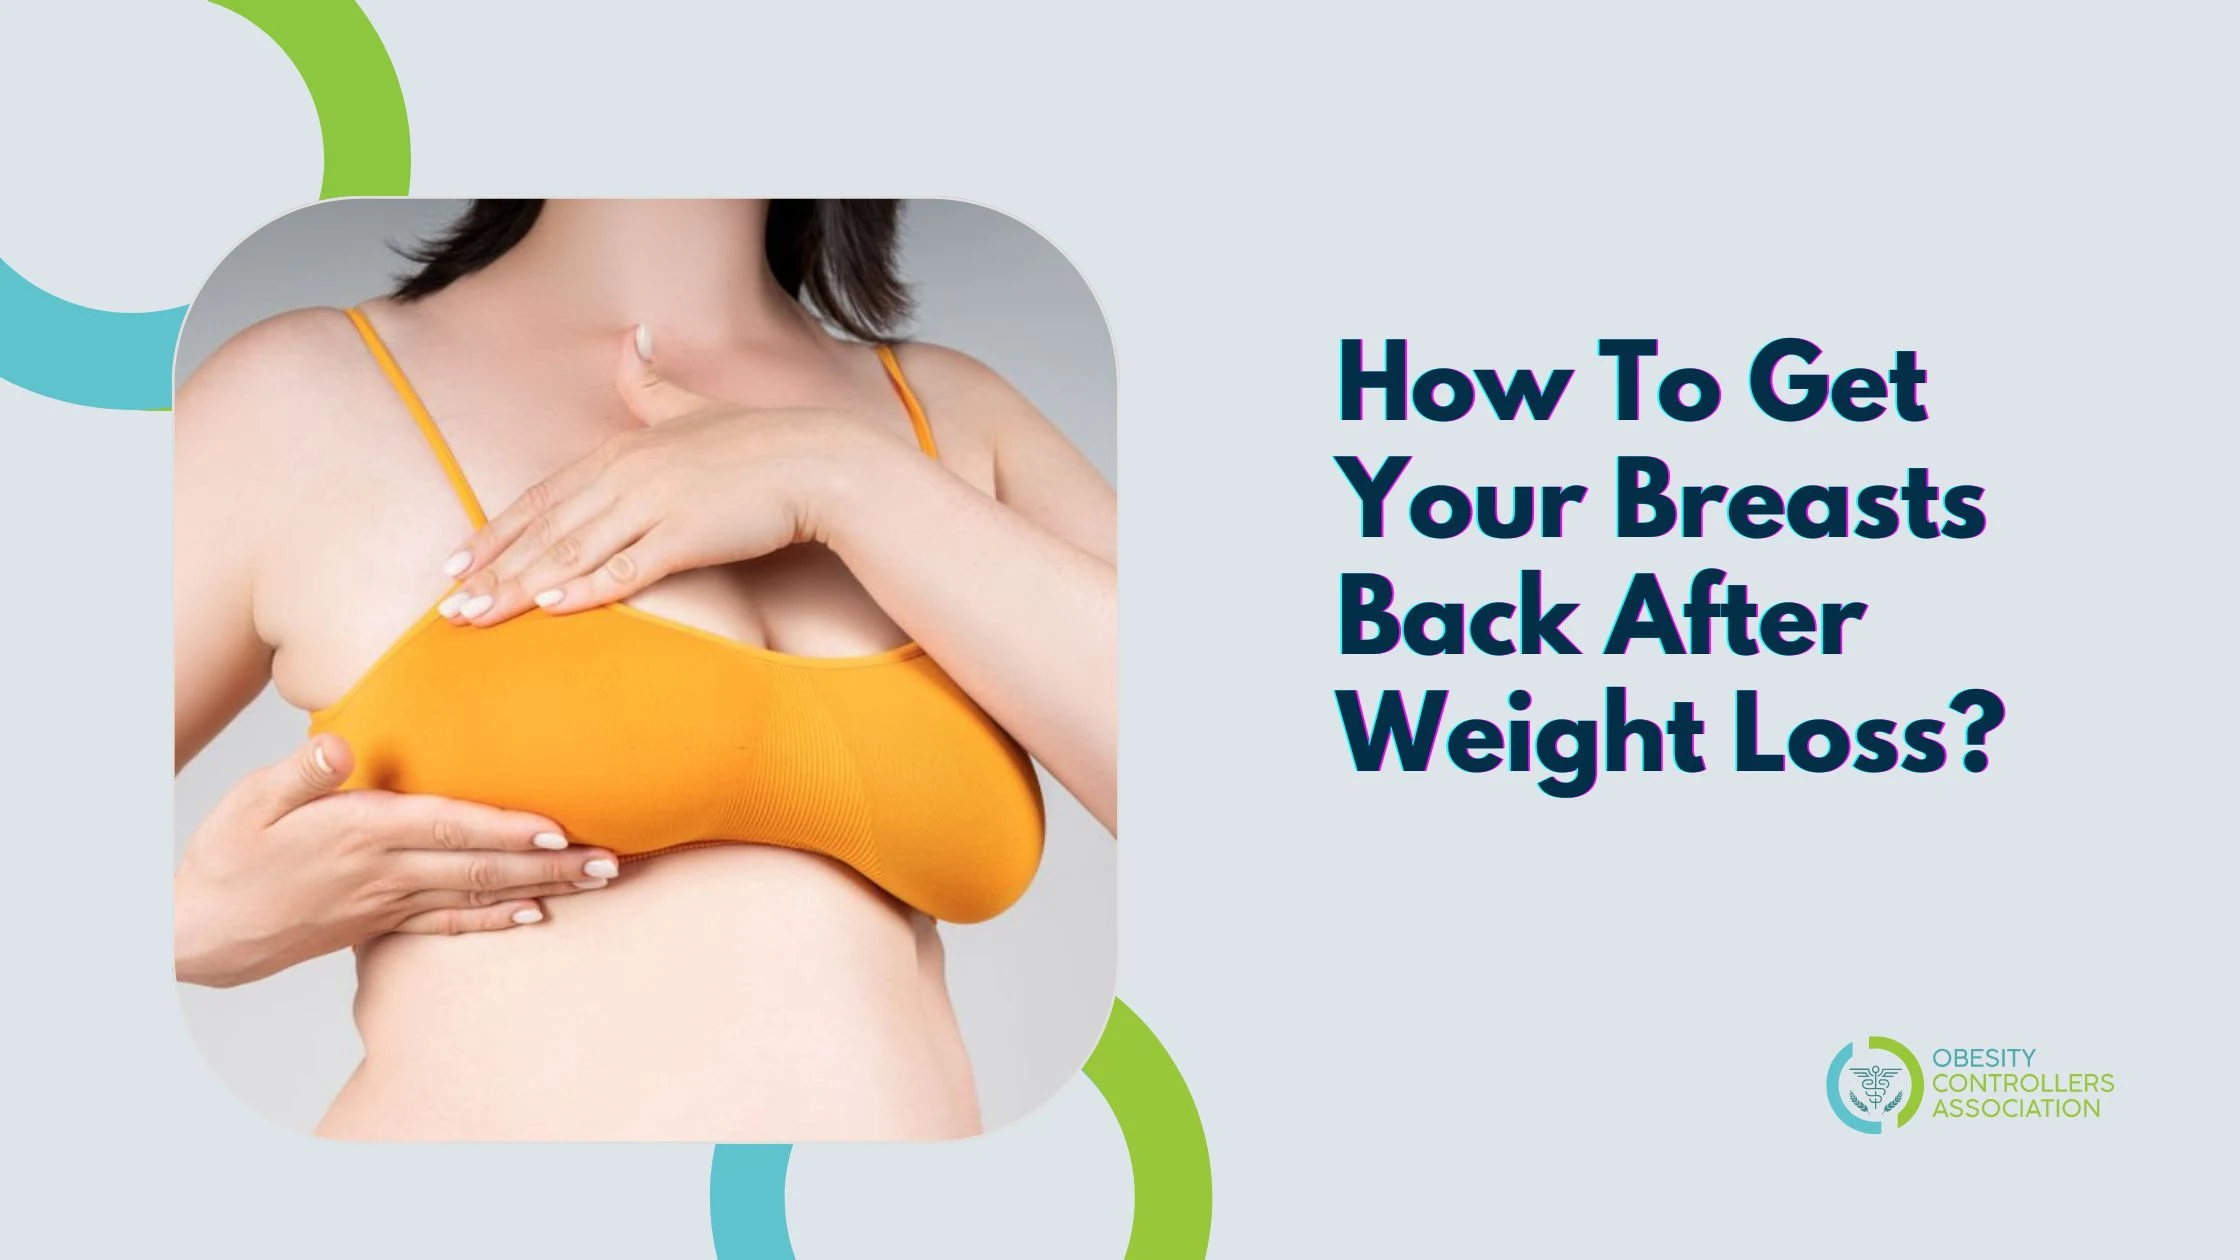 Get Your Breasts Back After Weight Loss